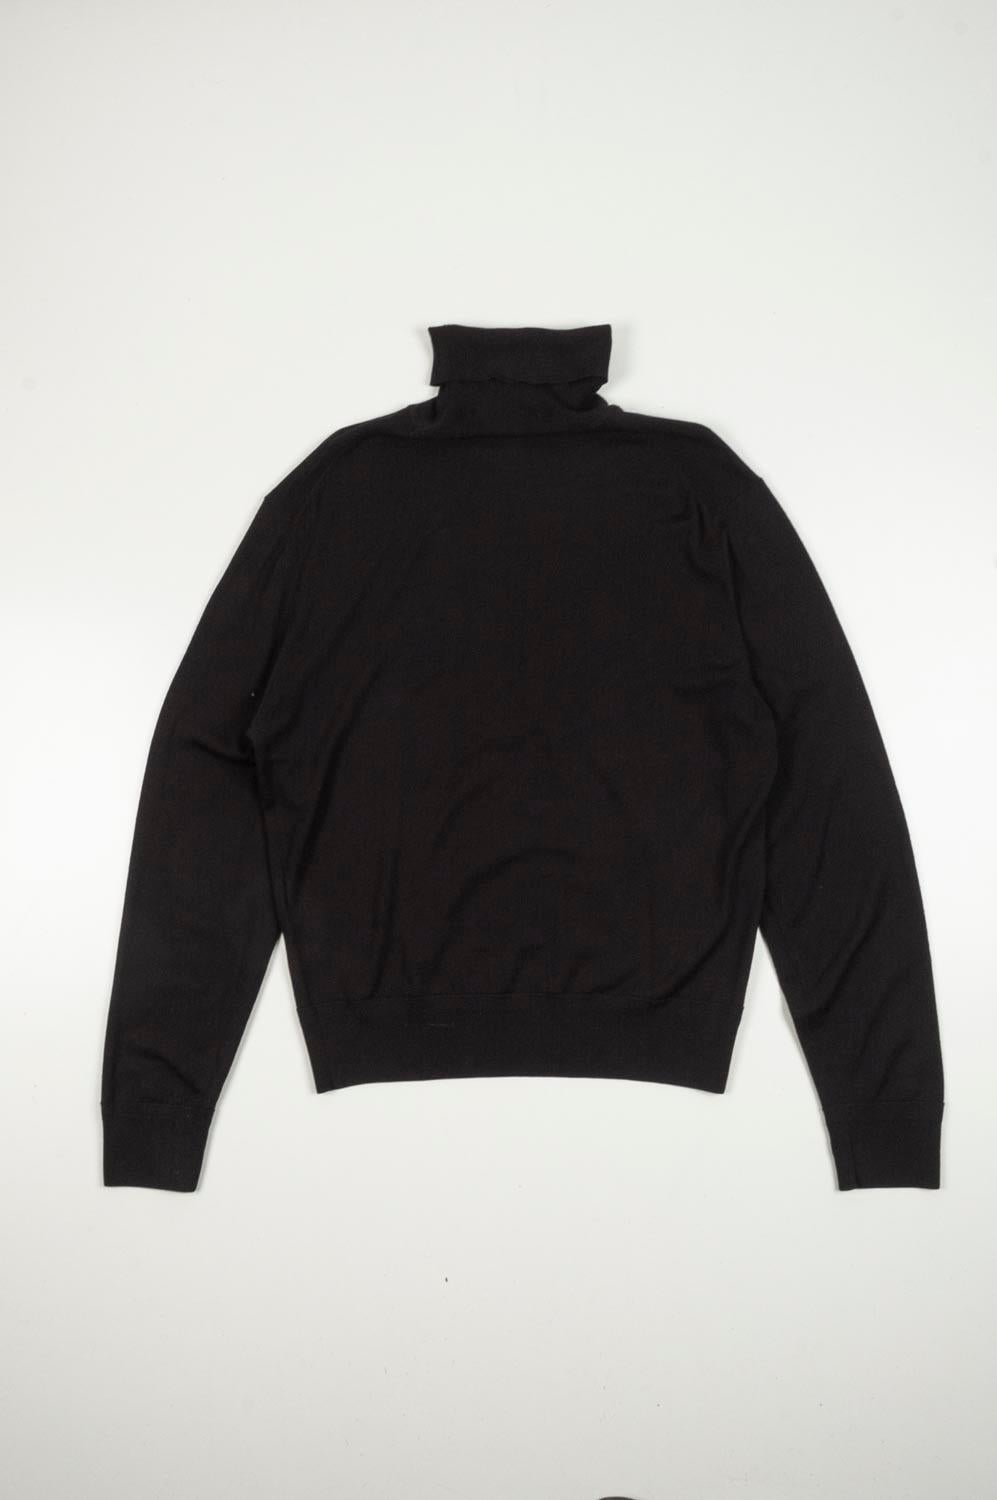 Tom Ford Wool Men Sweater Turtle Neck Size 52IT (Large), S454 For Sale 2